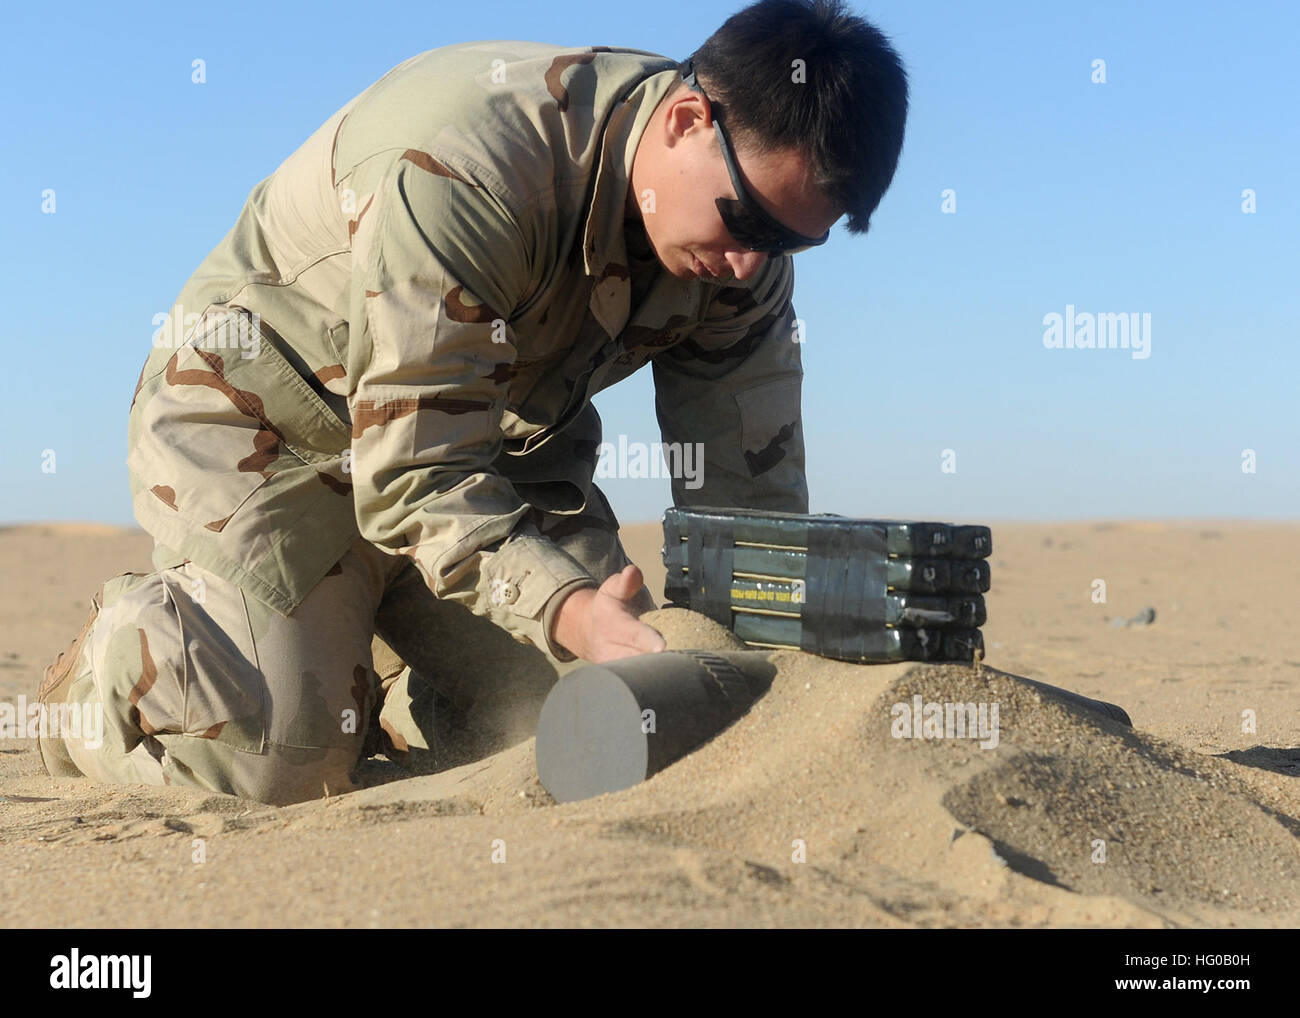 111213-N-BA263-569 CAMP BUEHRING, Kuwait (Dec. 13, 2011) Explosive Ordnance Disposal (EOD) Technician 2nd Class Reuban Villegas, assigned to Commander, Task Group (CTG) 56.1, places a composition C-4 demolition charge on a 155mm projectile during demolition operations supervisor training. CTG 56.1 provides mine counter-measure, explosive ordnance disposal, salvage-diving, counter-terrorism and force protection for the U.S. 5th Fleet area of responsibility. (U.S. Navy photo by Chief Mass Communication Specialist Kathryn Whittenberger/Released) US Navy 111213-N-BA263-569 Explosive Ordnance Dispo Stock Photo